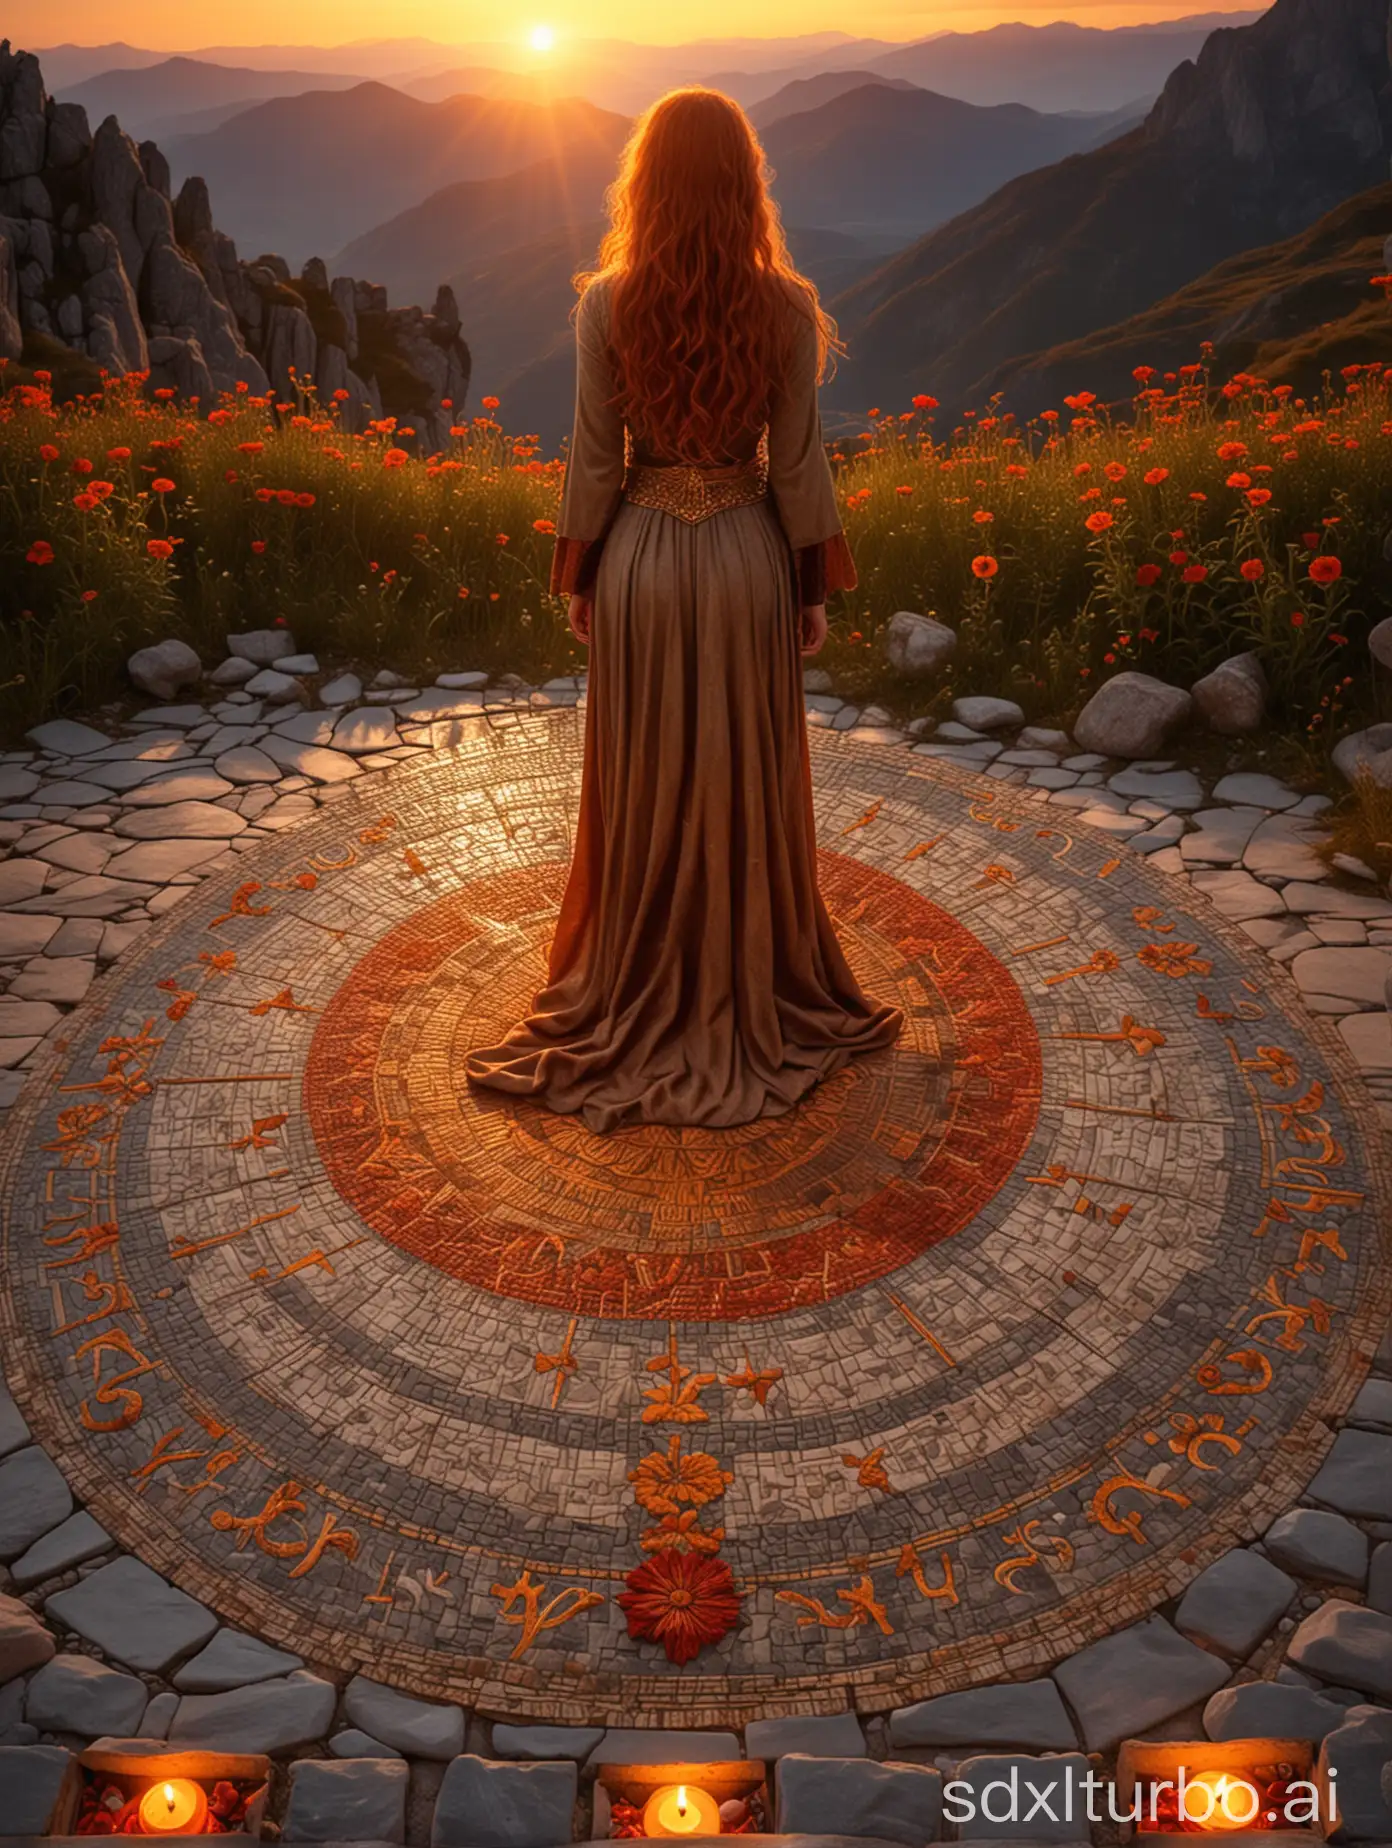 A magnificent sunset over a stone sun mosaic floor, red candles and orange flowers, a distant beautiful female viking goddess with long reddish hair wearing a long tunic adorned with golden symbols, rocky mountains in the back, sunset, chiaroscuro, autumnal atmosphere, high precision, highly detailed, photographic